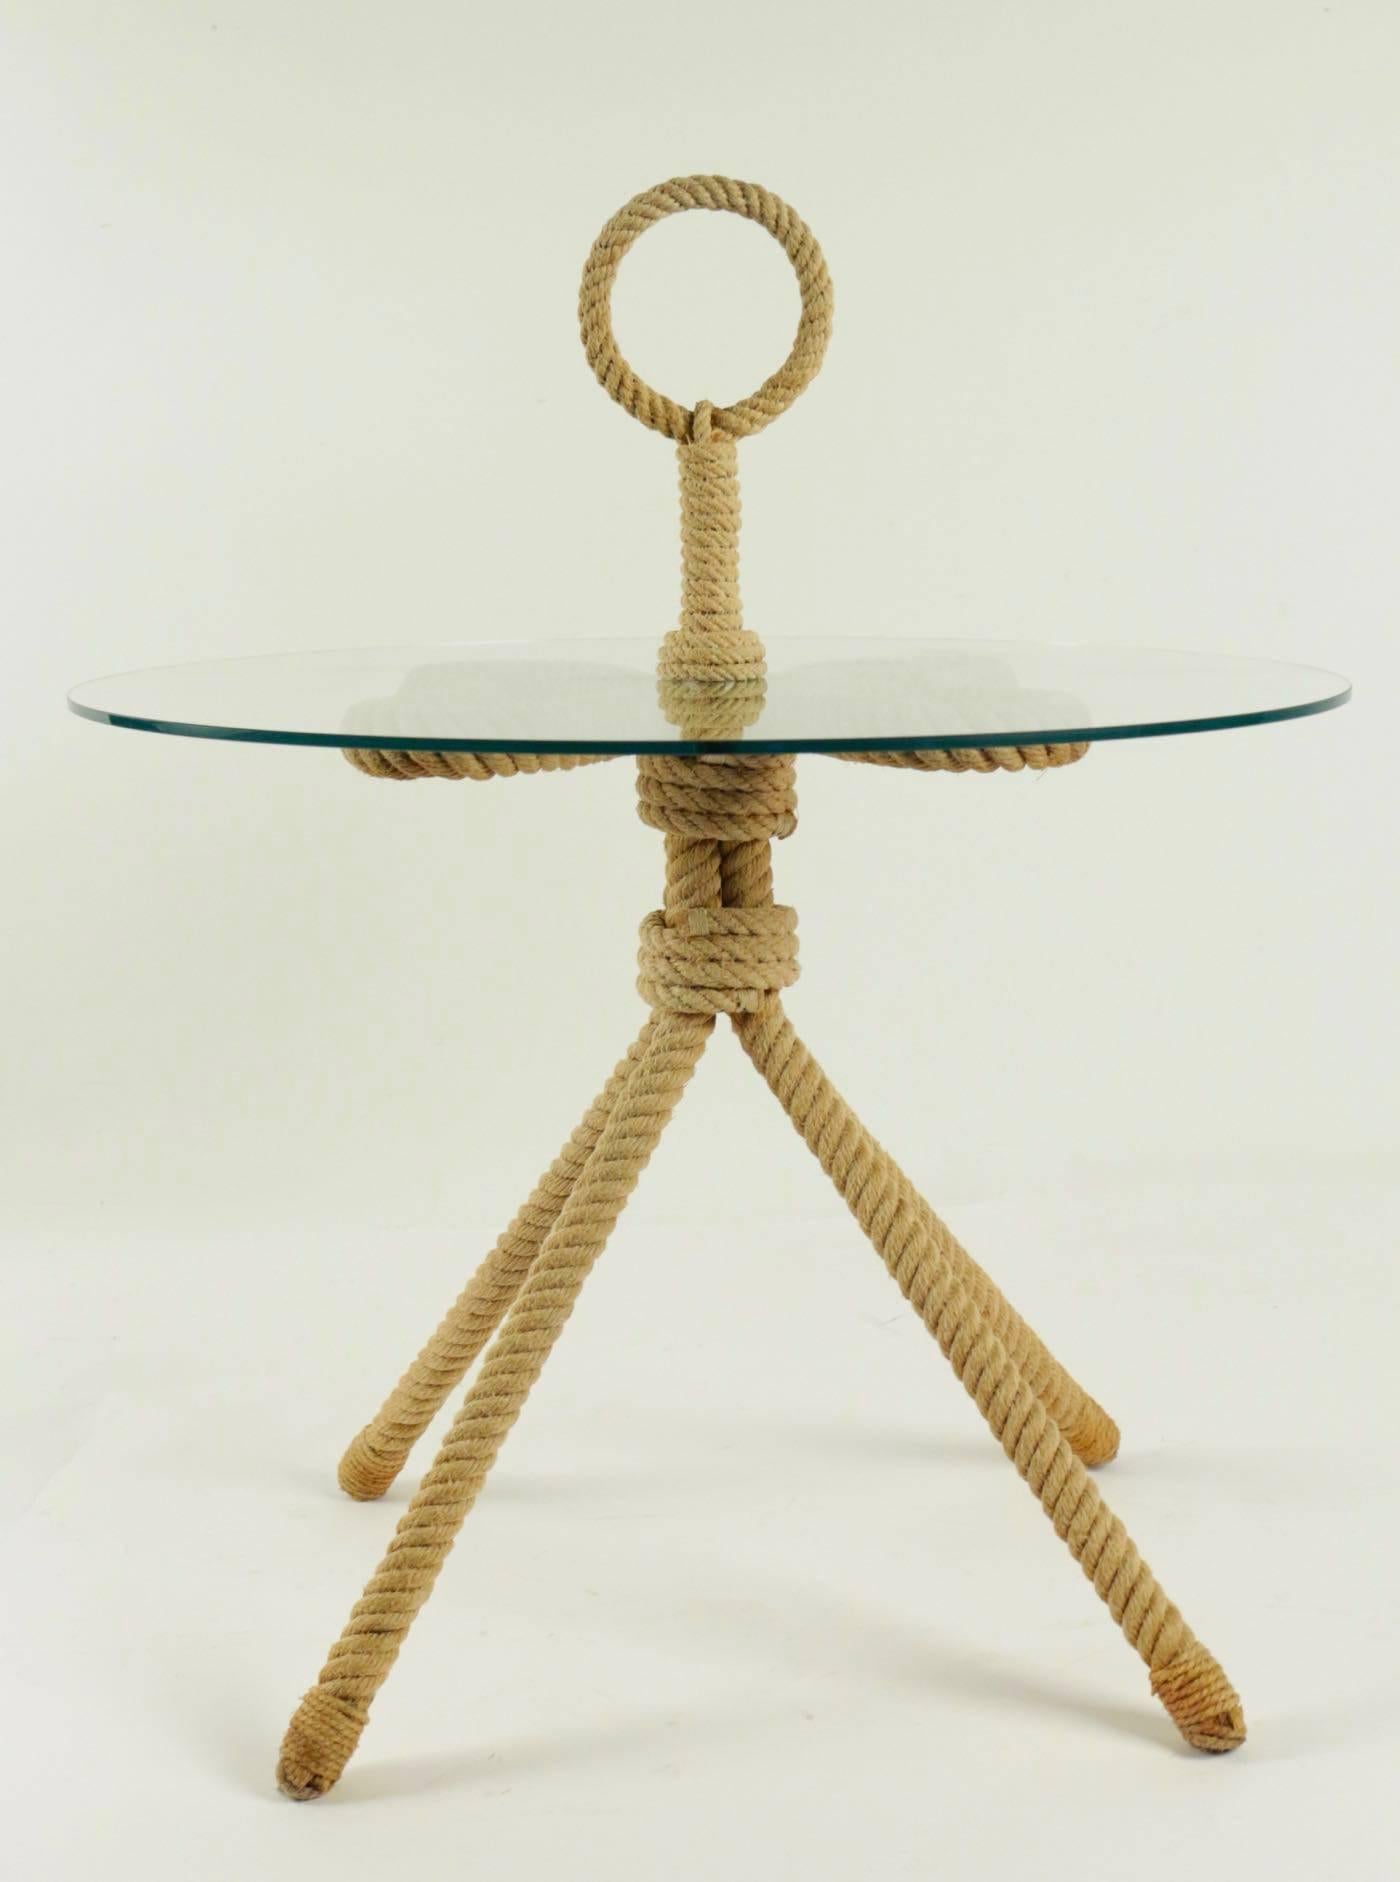 1960s Audoux and Minet rope Gueridon table.

Lovely pedestal table made of rope with four legs, a round glass plate and at the upper part, a rope ring as handle to carry him everywhere.

Nice and clever.